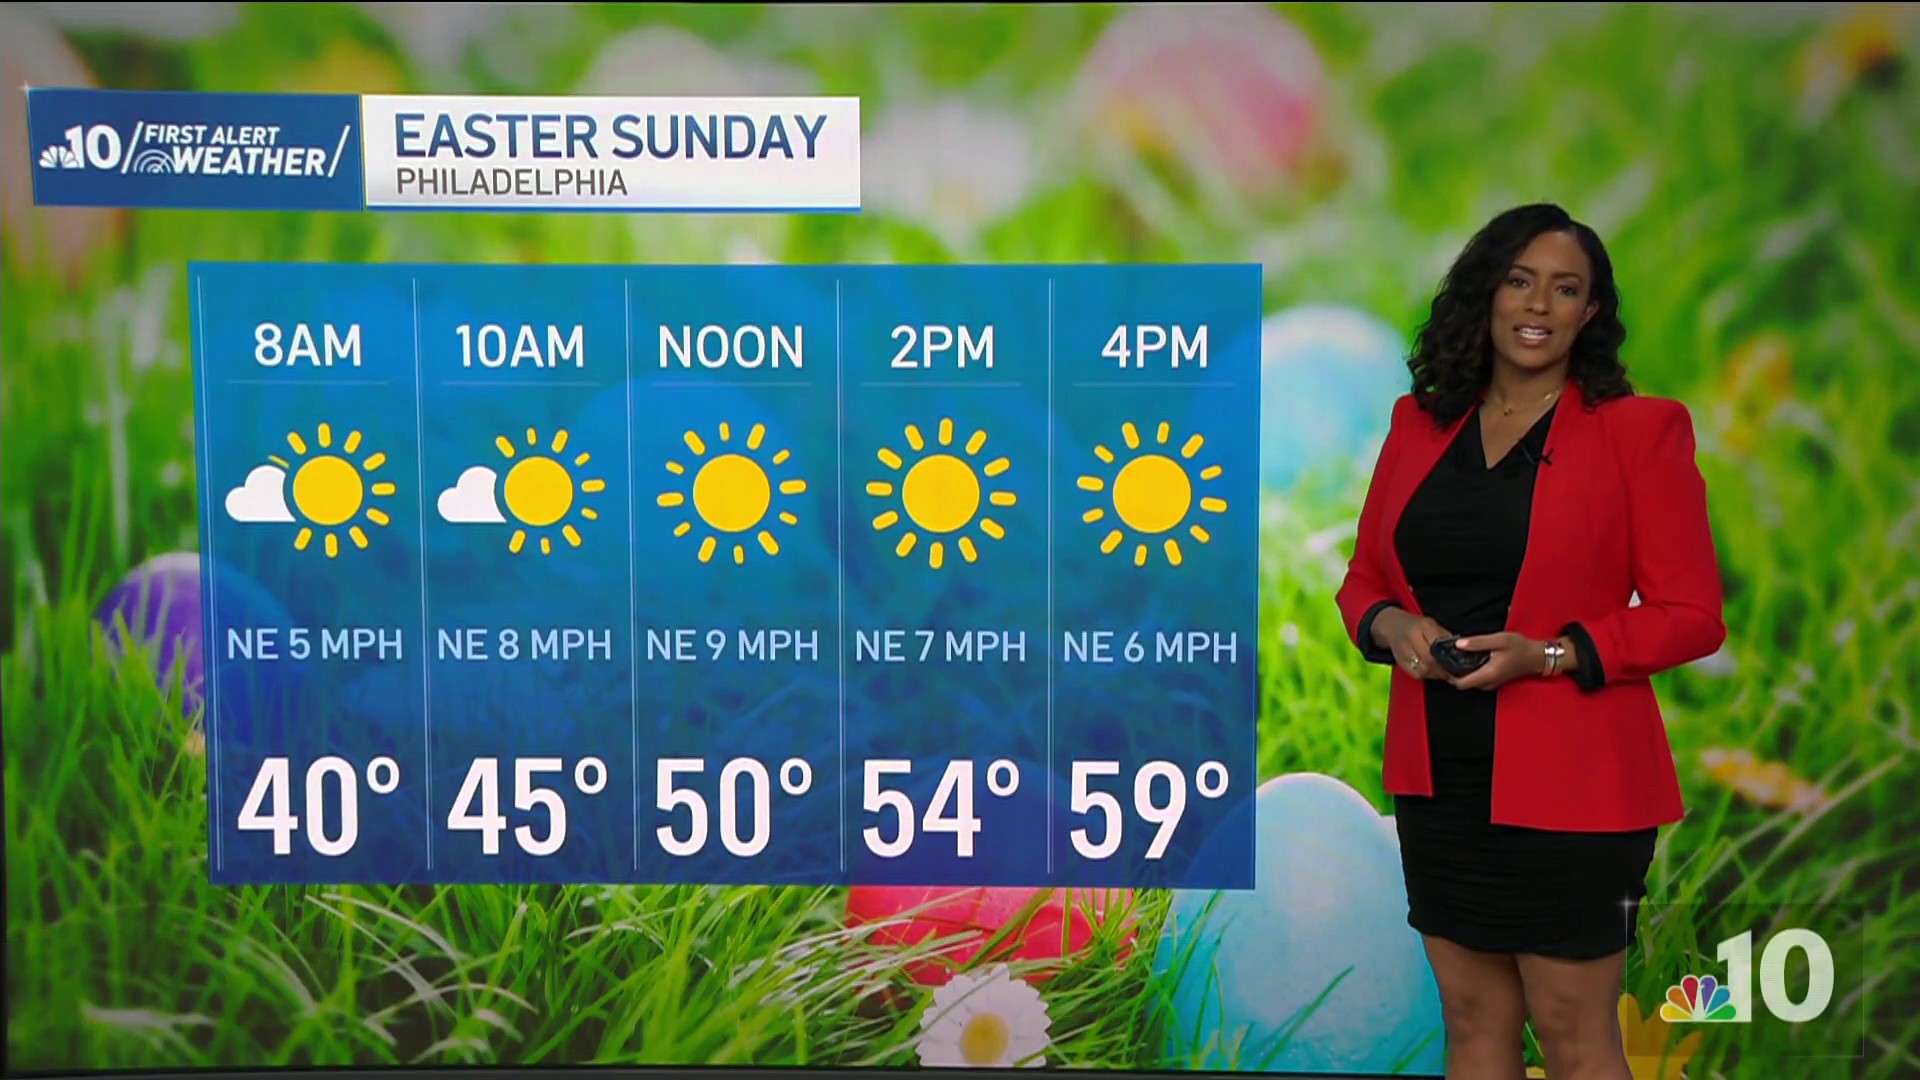 NBC10 First Alert Weather: A Mild and Sunny Easter Sunday Up Ahead – NBC10 Philadelphia